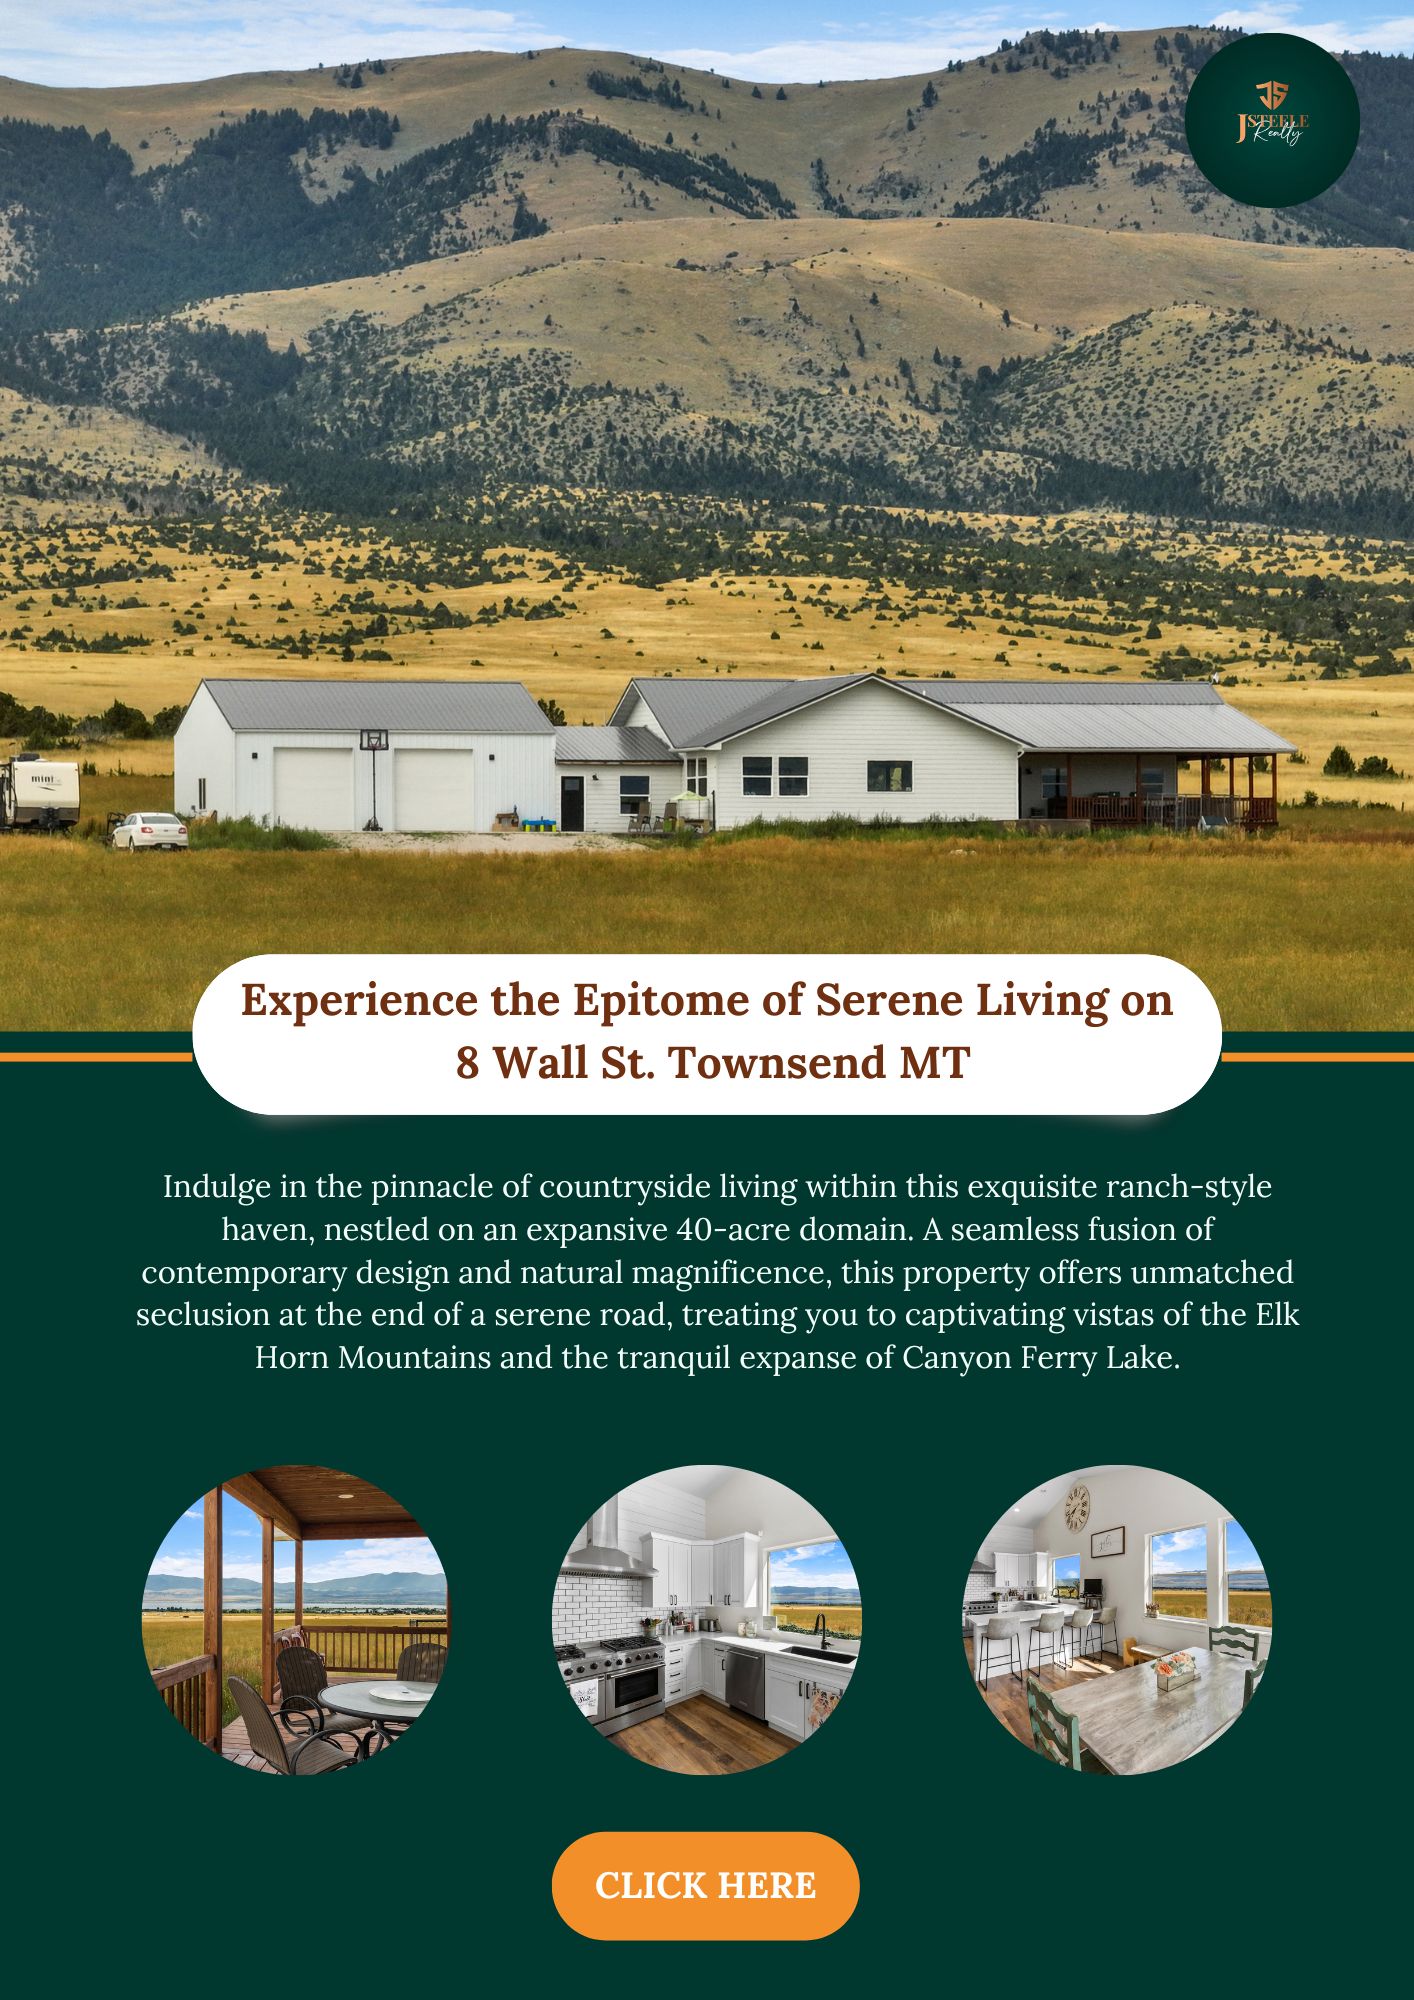 Experience the Epitome of Serene Living on 8 Wall Street Townsend Montana